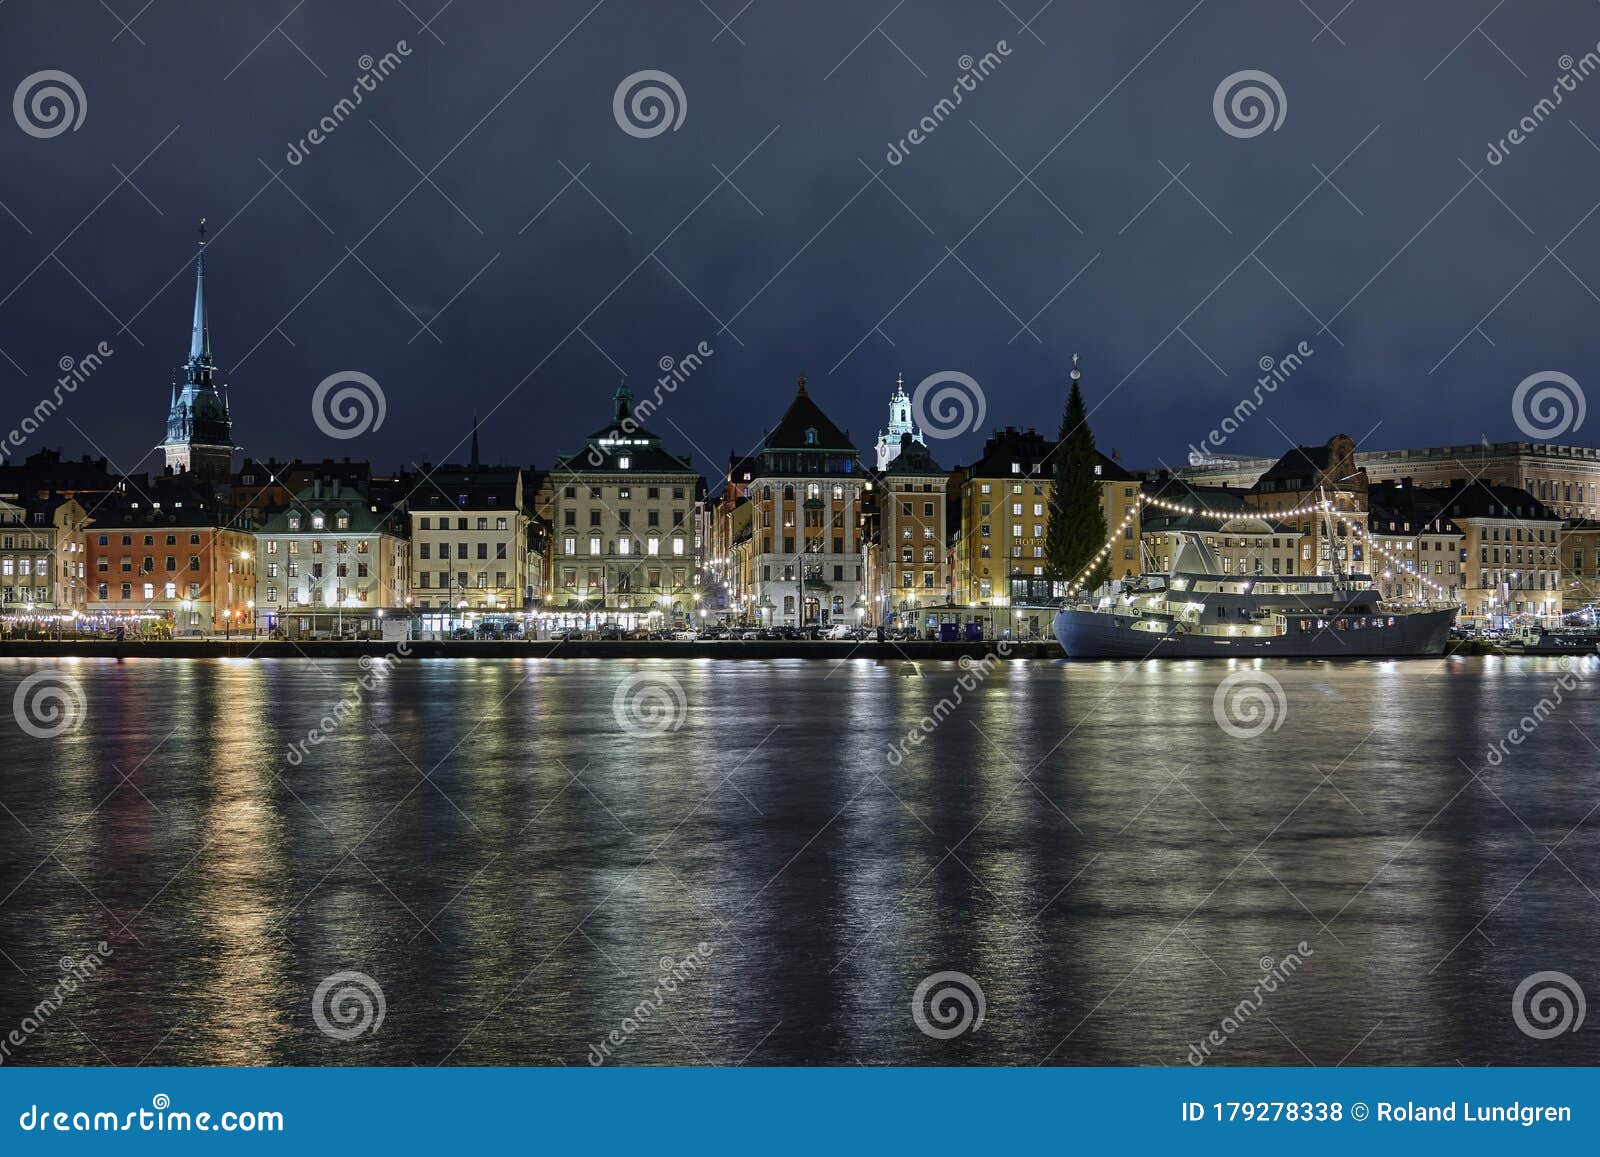 old town in stockholm in the evening